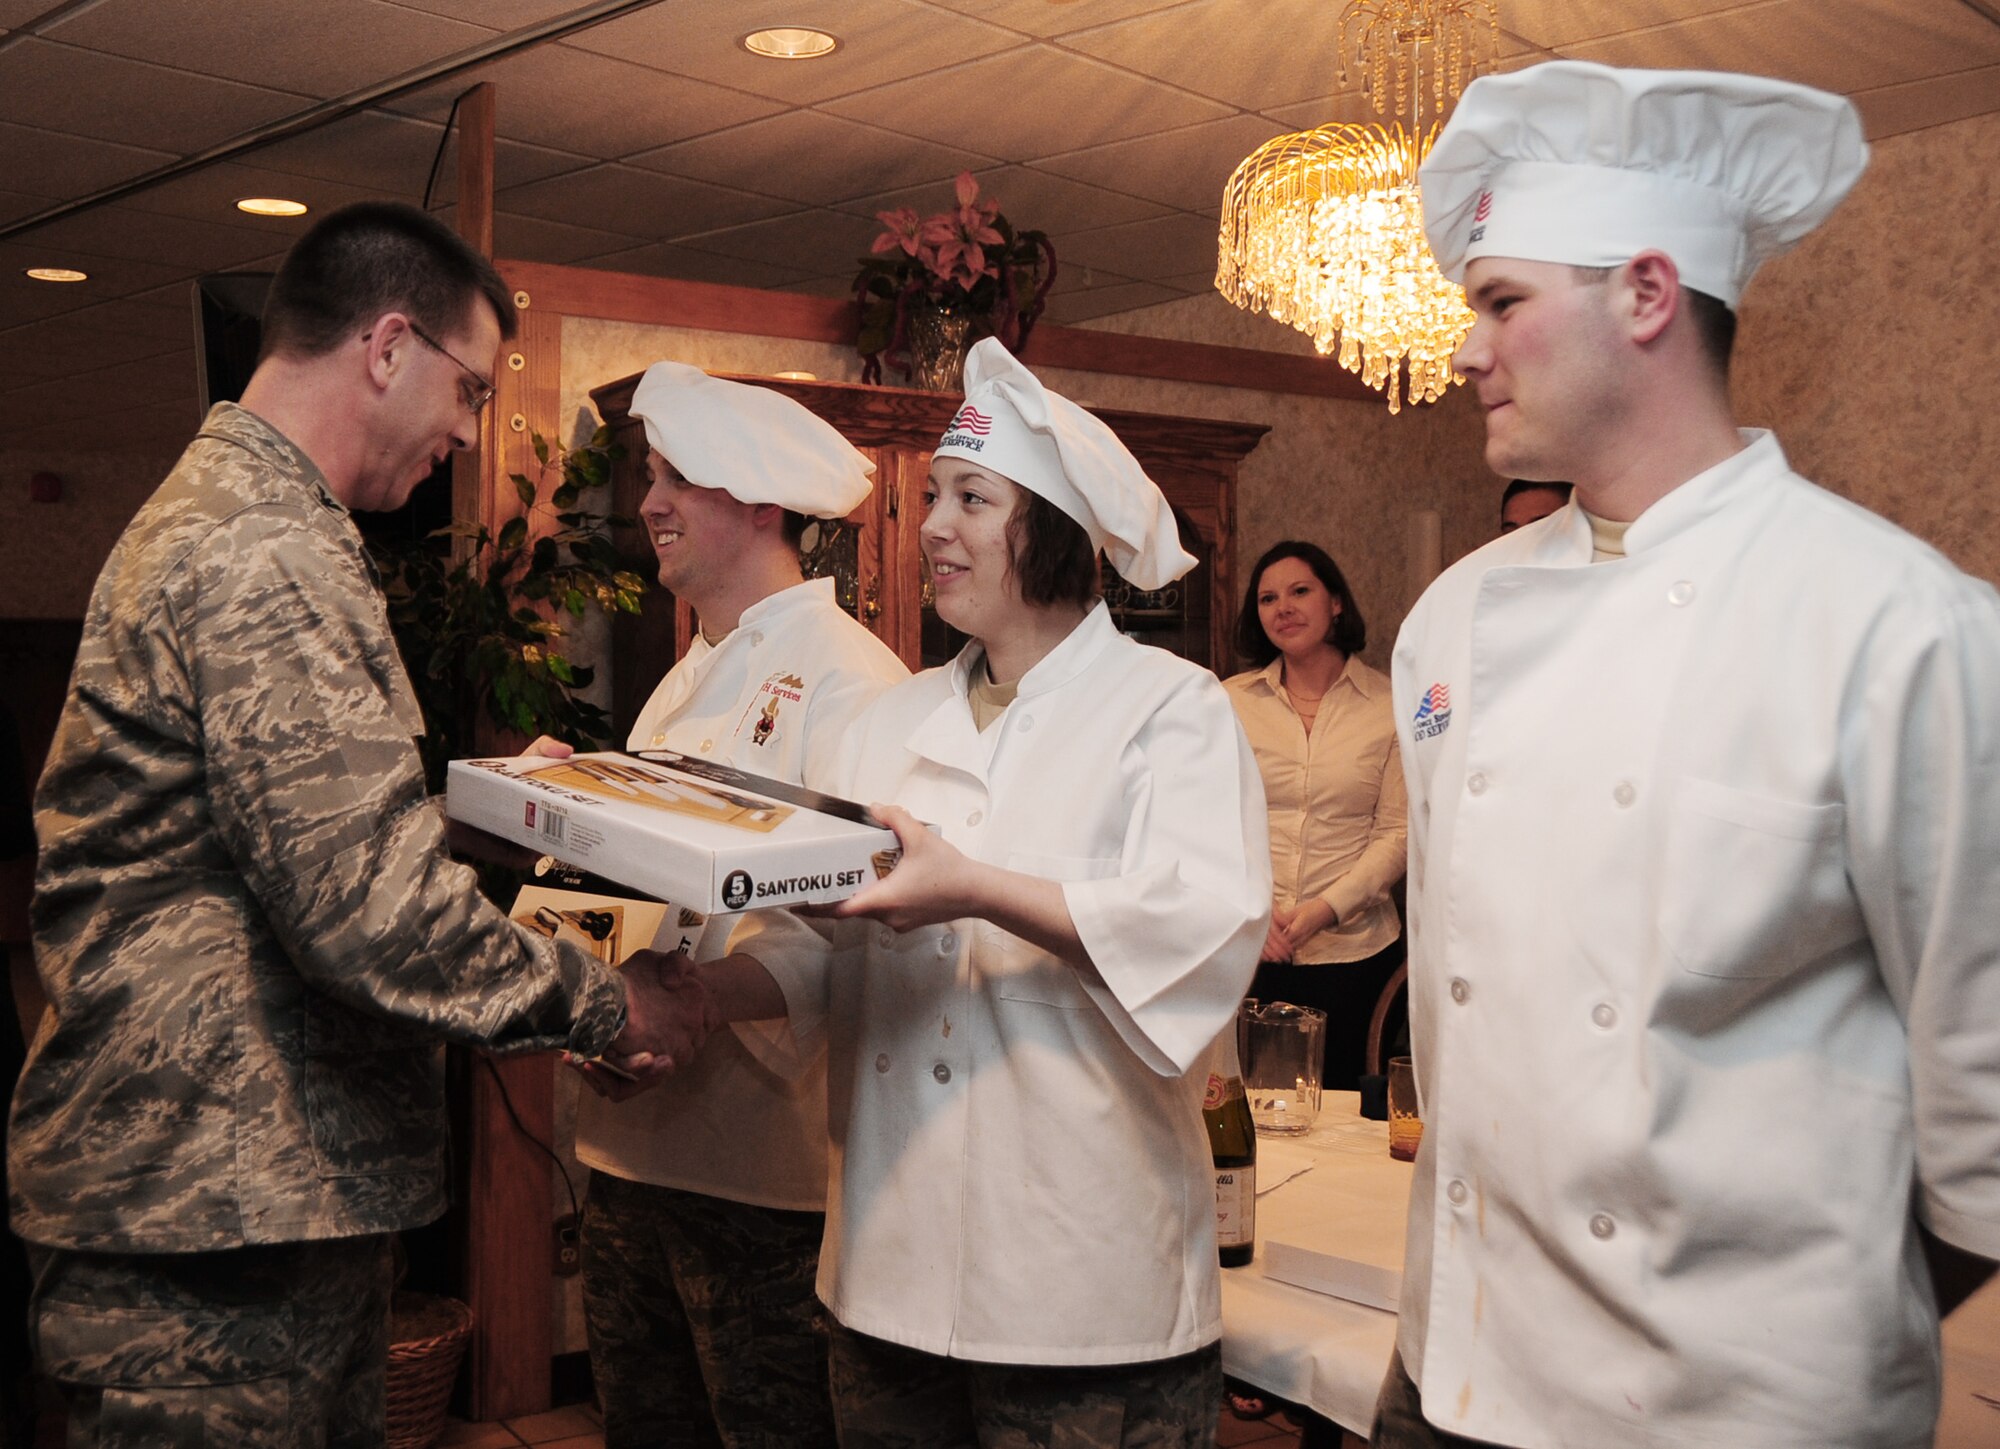 Col. Steven Hiss (left) presents Airmen 1st Class Tiffany Lamb and Brent Smith and Airman Reese Audette with a four-piece knife set during the "Ellsworth Iron Chef" competition March 17, 2010, at Ellsworth Air Force Base, S.D. The competition was an hour-long competition between four teams preparing three dishes with an Irish twist. Colonel Hiss is the 28th Bomb Wing vice commander, and Airmen Lamb, Smith and Audette are 28th Force Support Squadron cooks. (U.S. Air Force photo/Airman 1st Class Anthony Sanchelli)